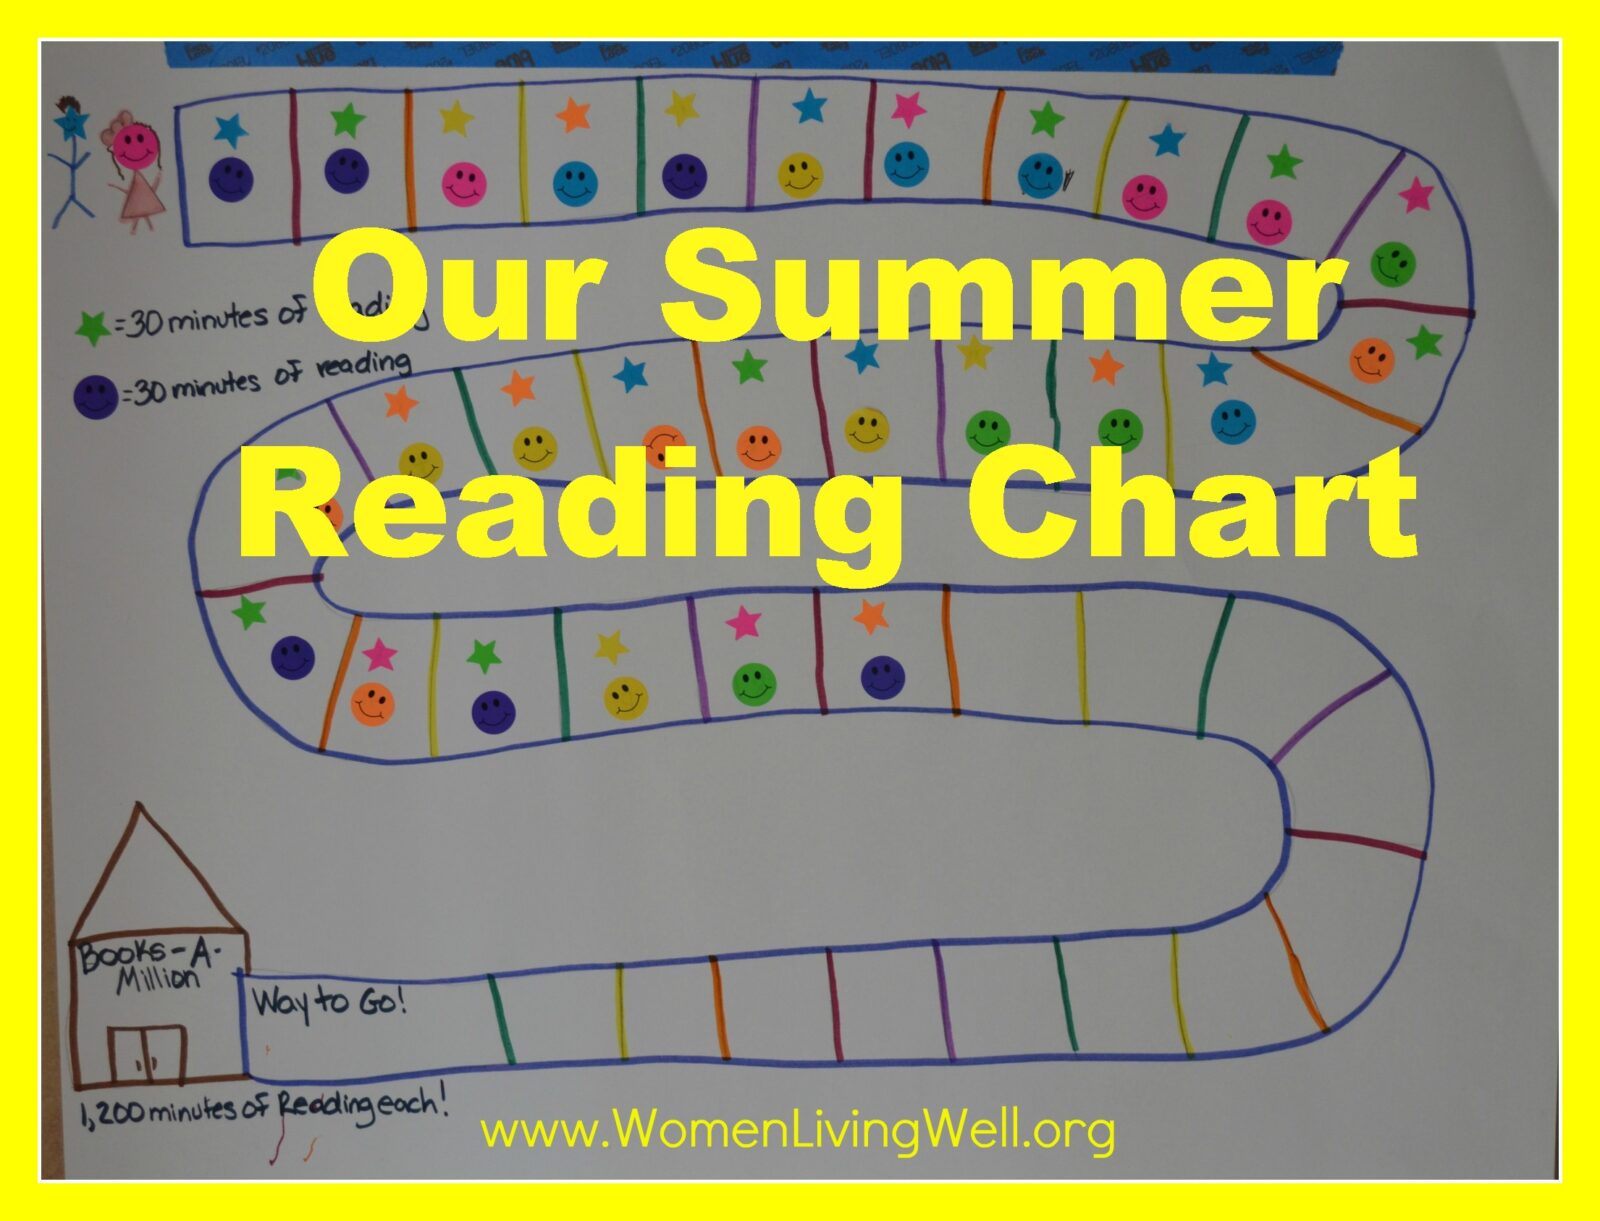 Our Summer Reading Chart